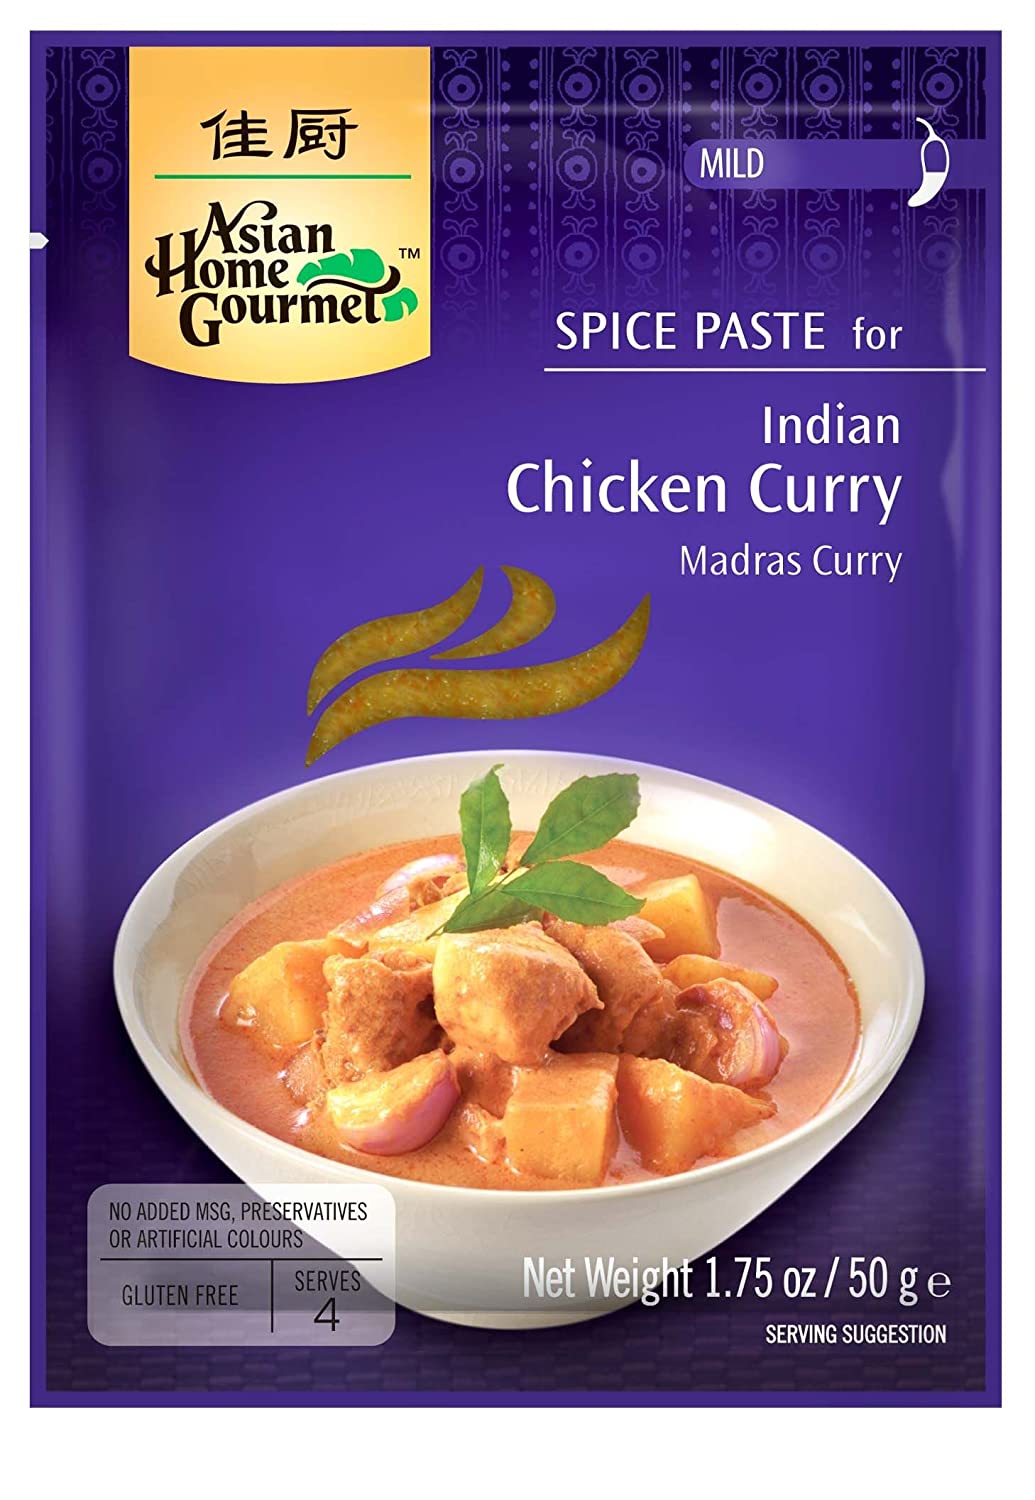 Asian Home Gourmet Indian Chicken Curry Spice Paste